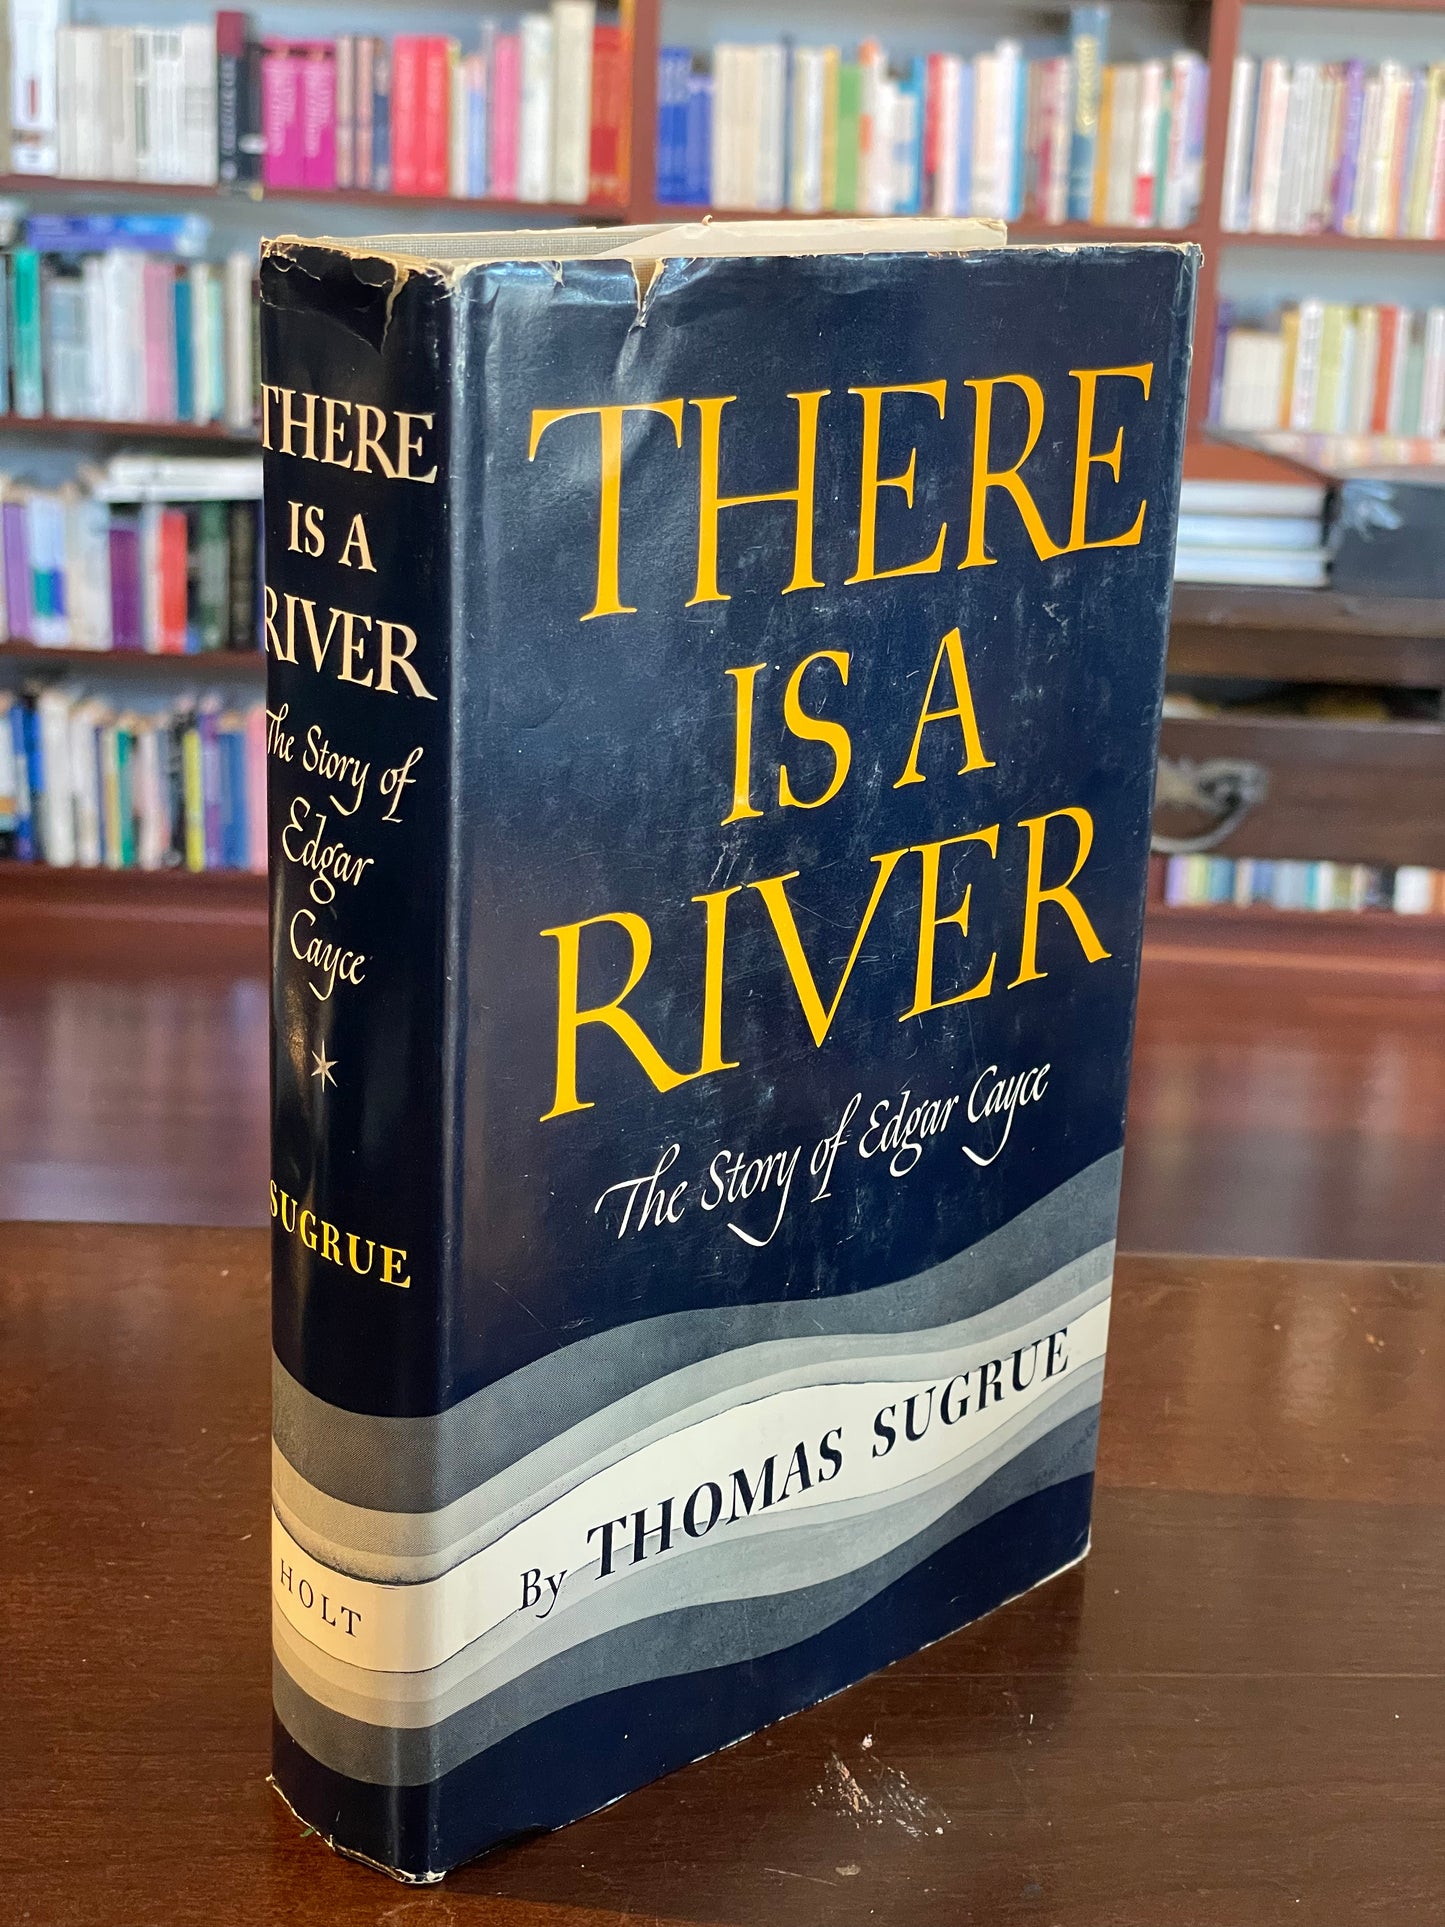 There is A River by Thomas Sugrue